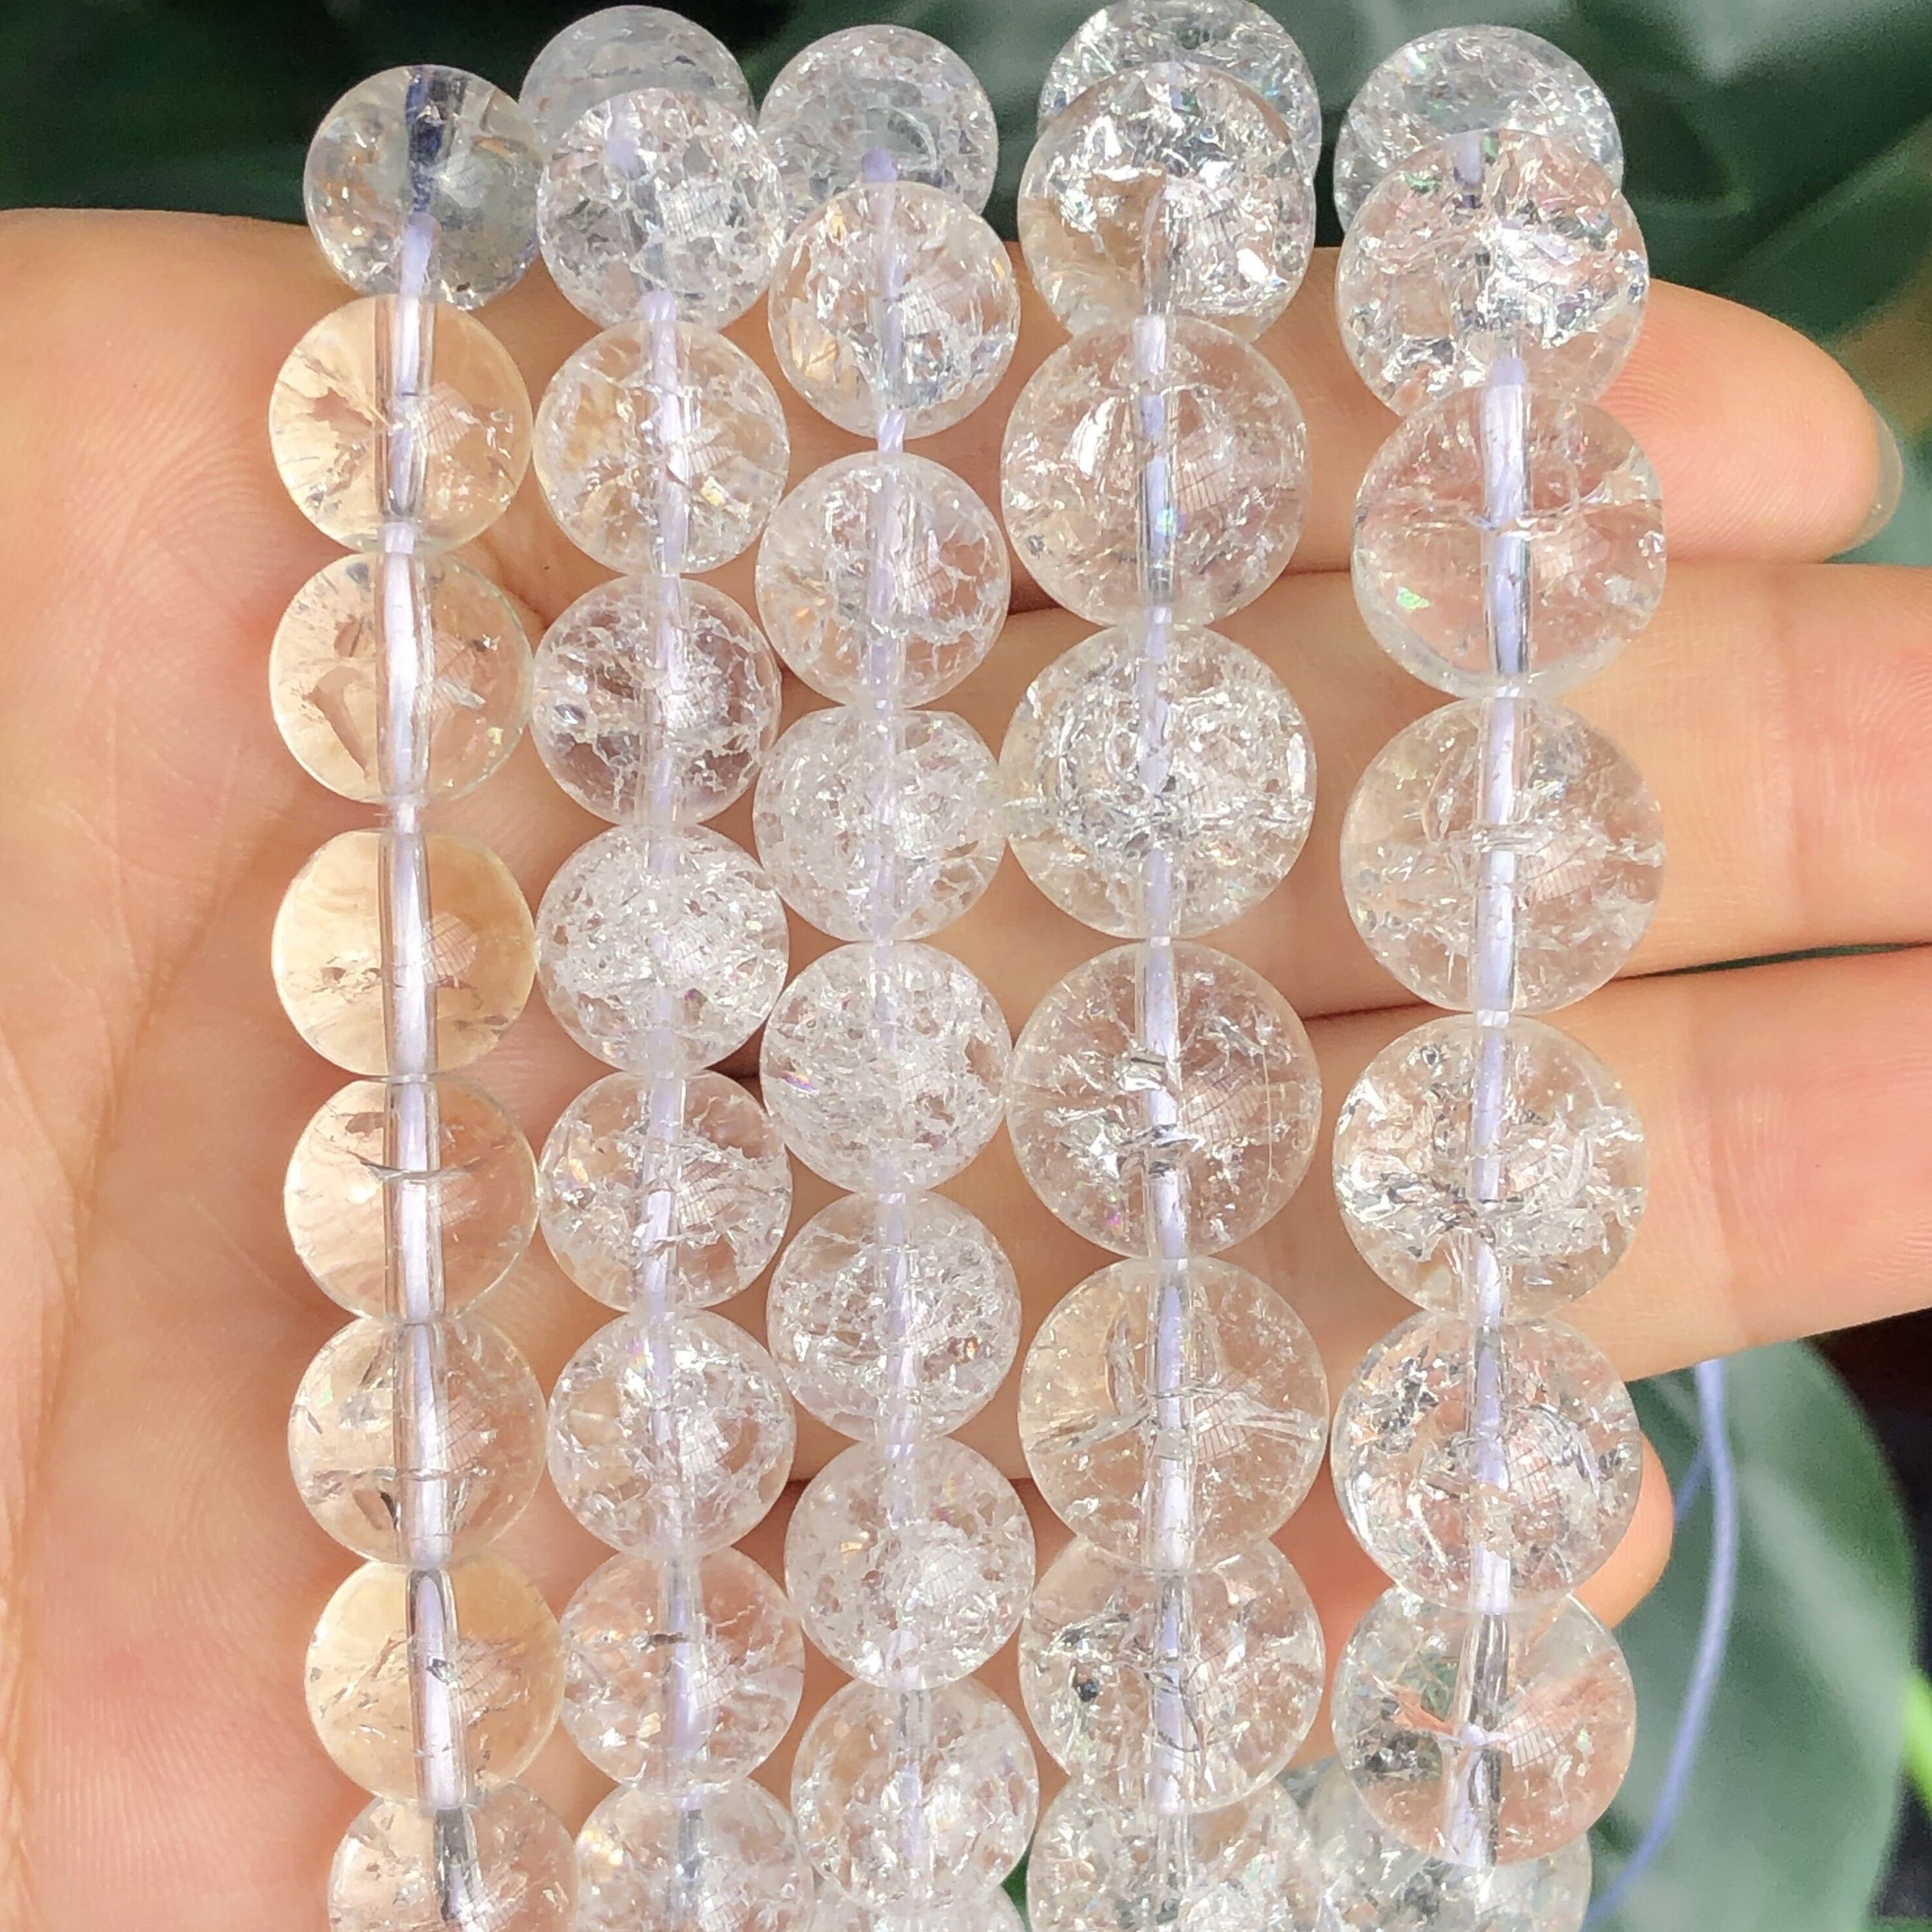 Clear Quartz 8mm Round Bead (x1)  Yellow Brick Road provides Beads,  Findings, Jewellry Reapirs